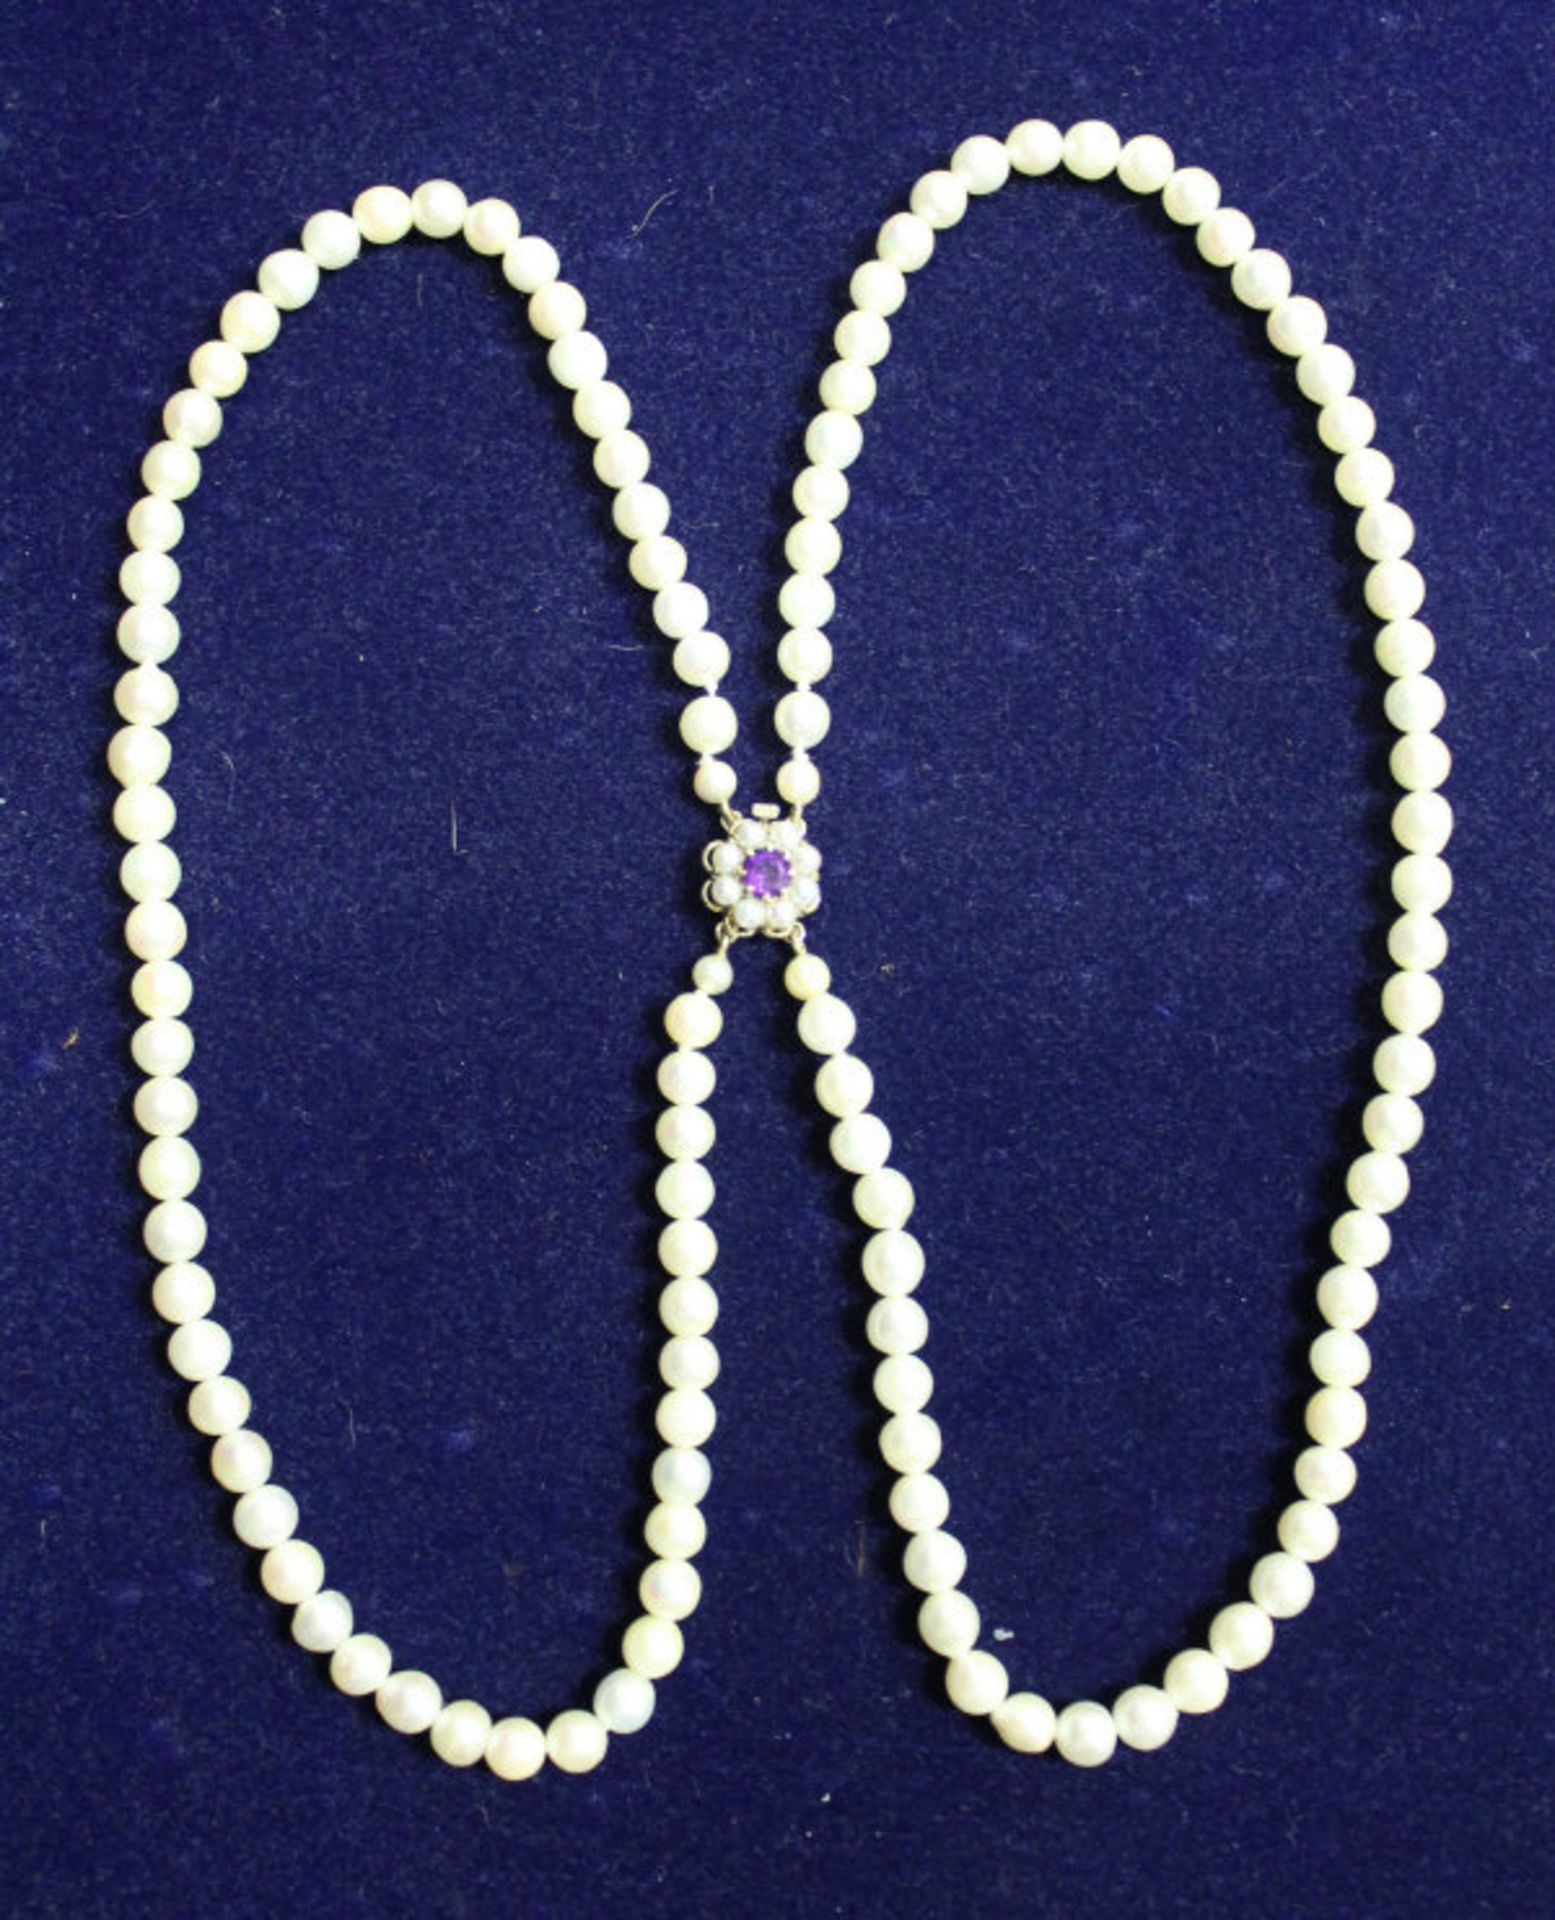 Double strand cultured pearl necklace with 9ct gold mounted amethyst and pearl clasp length 16